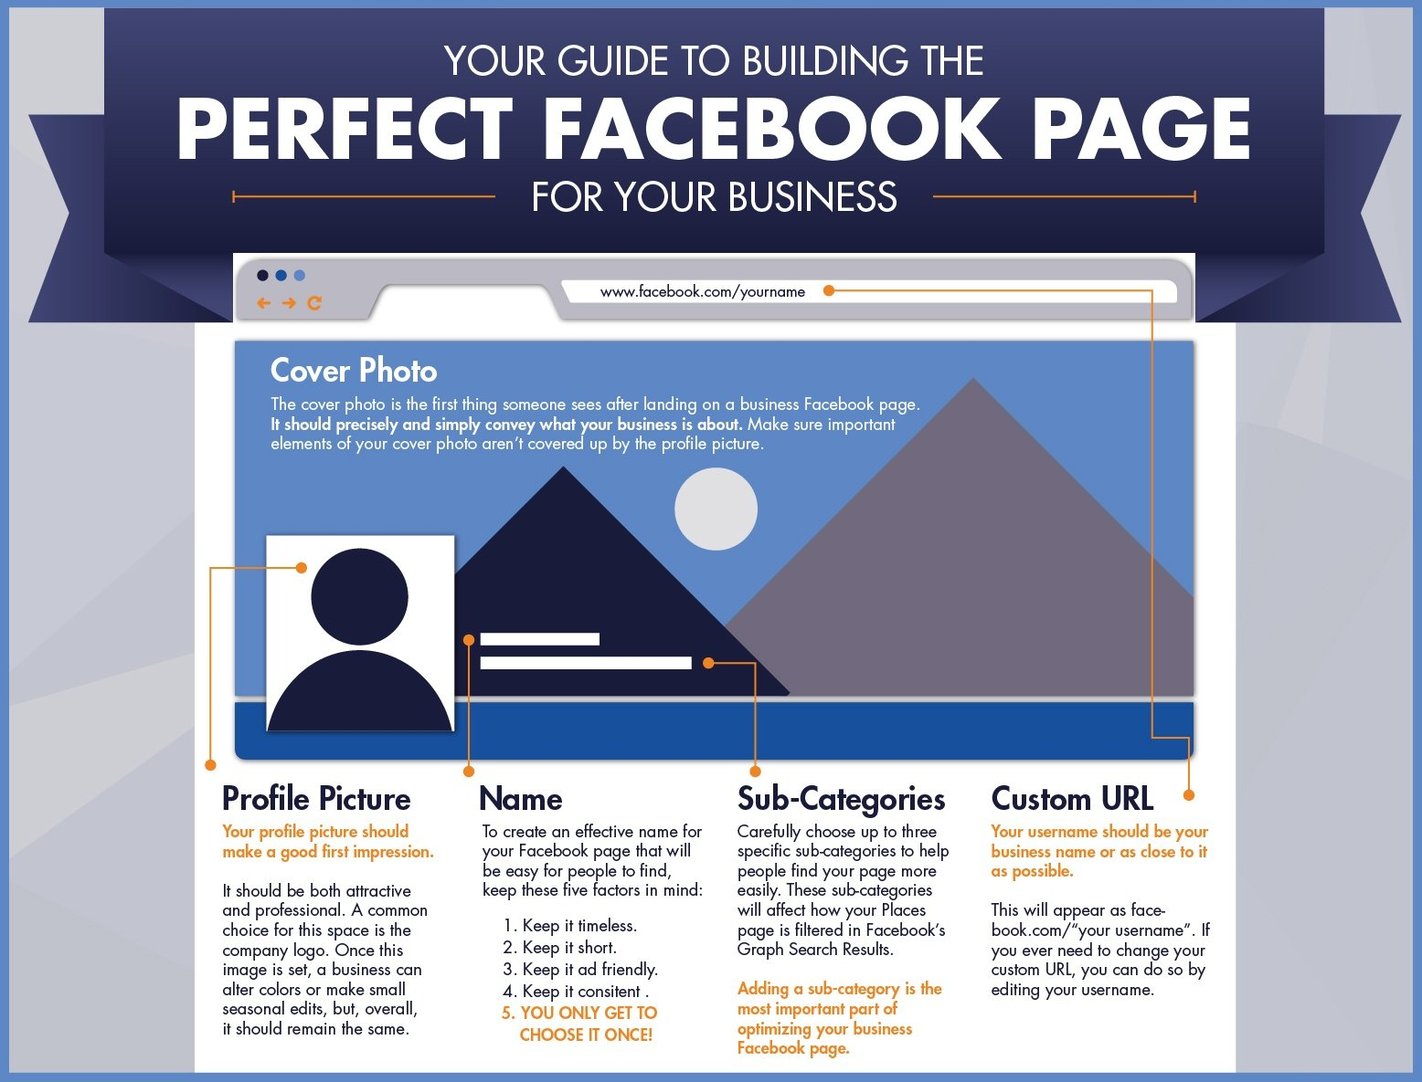 Build the Perfect Facebook Page for Your Business